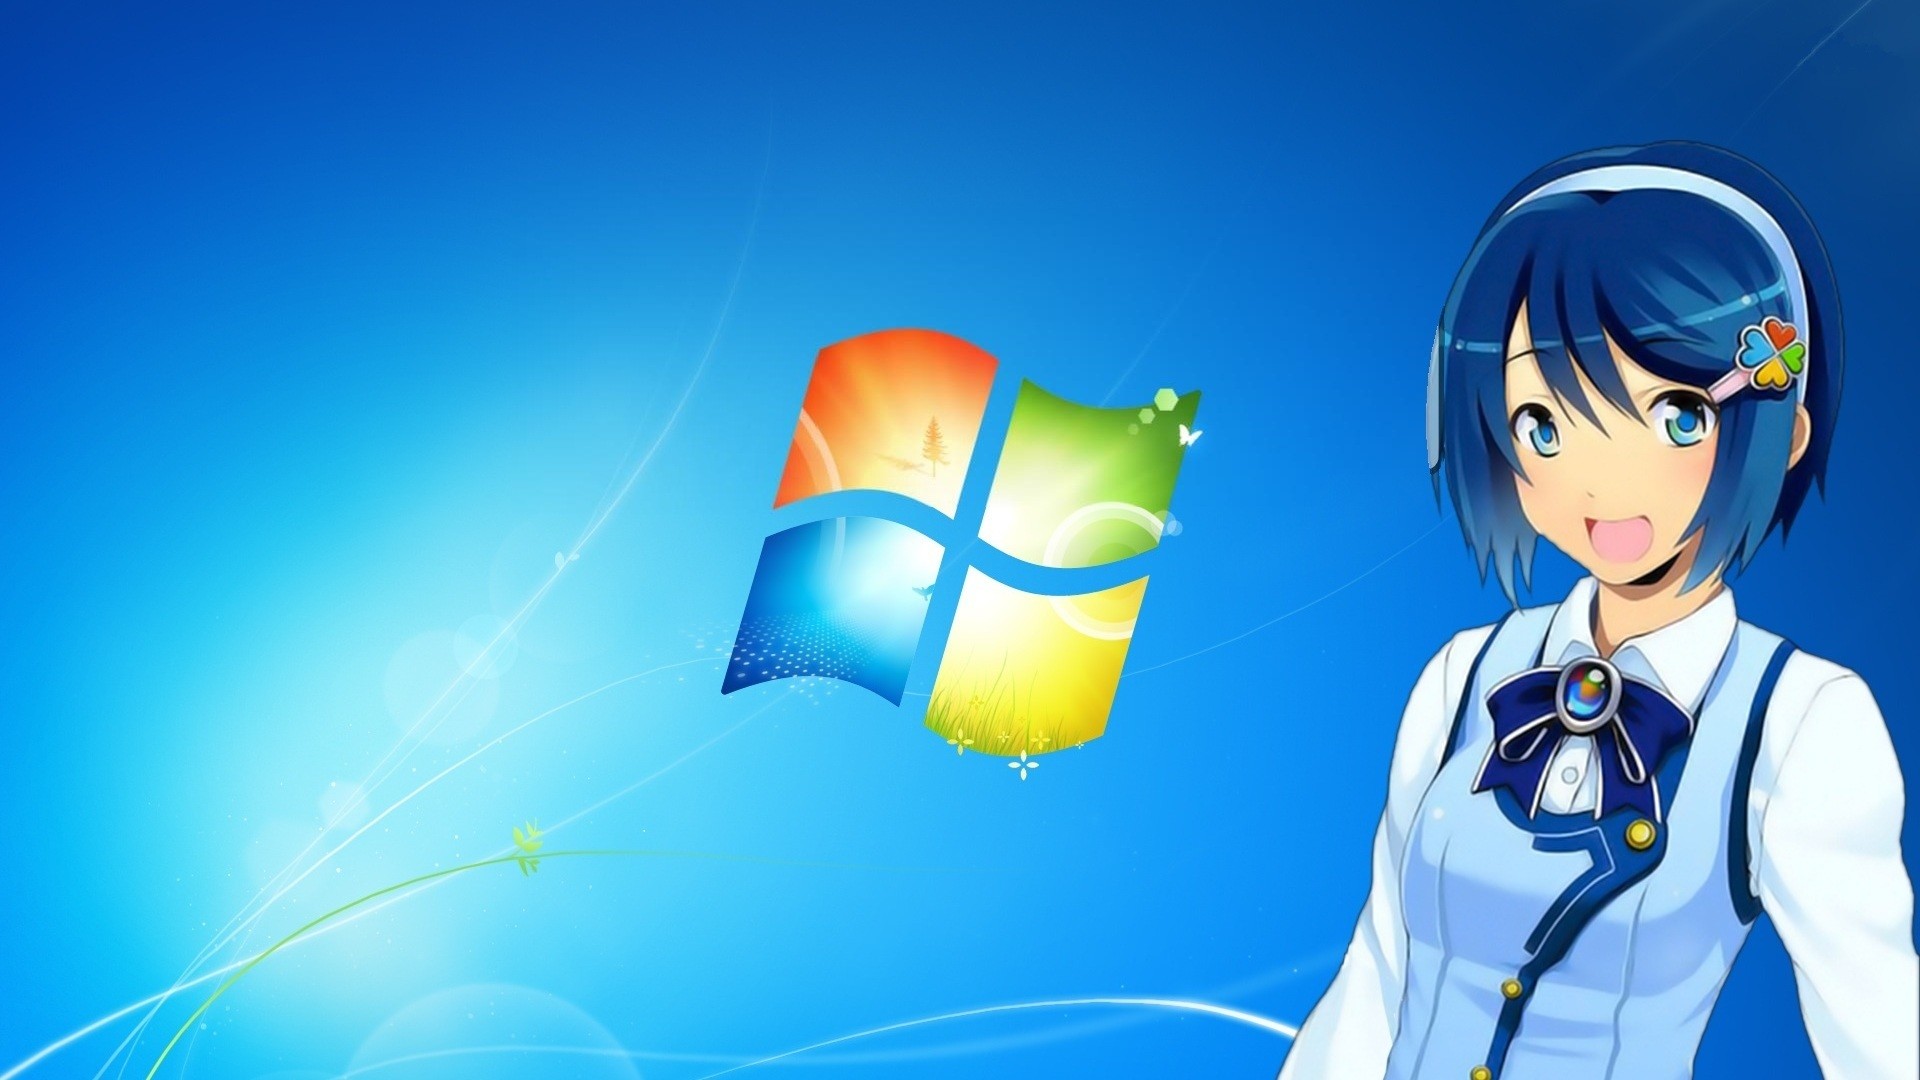 Anime Wallpapers for PC